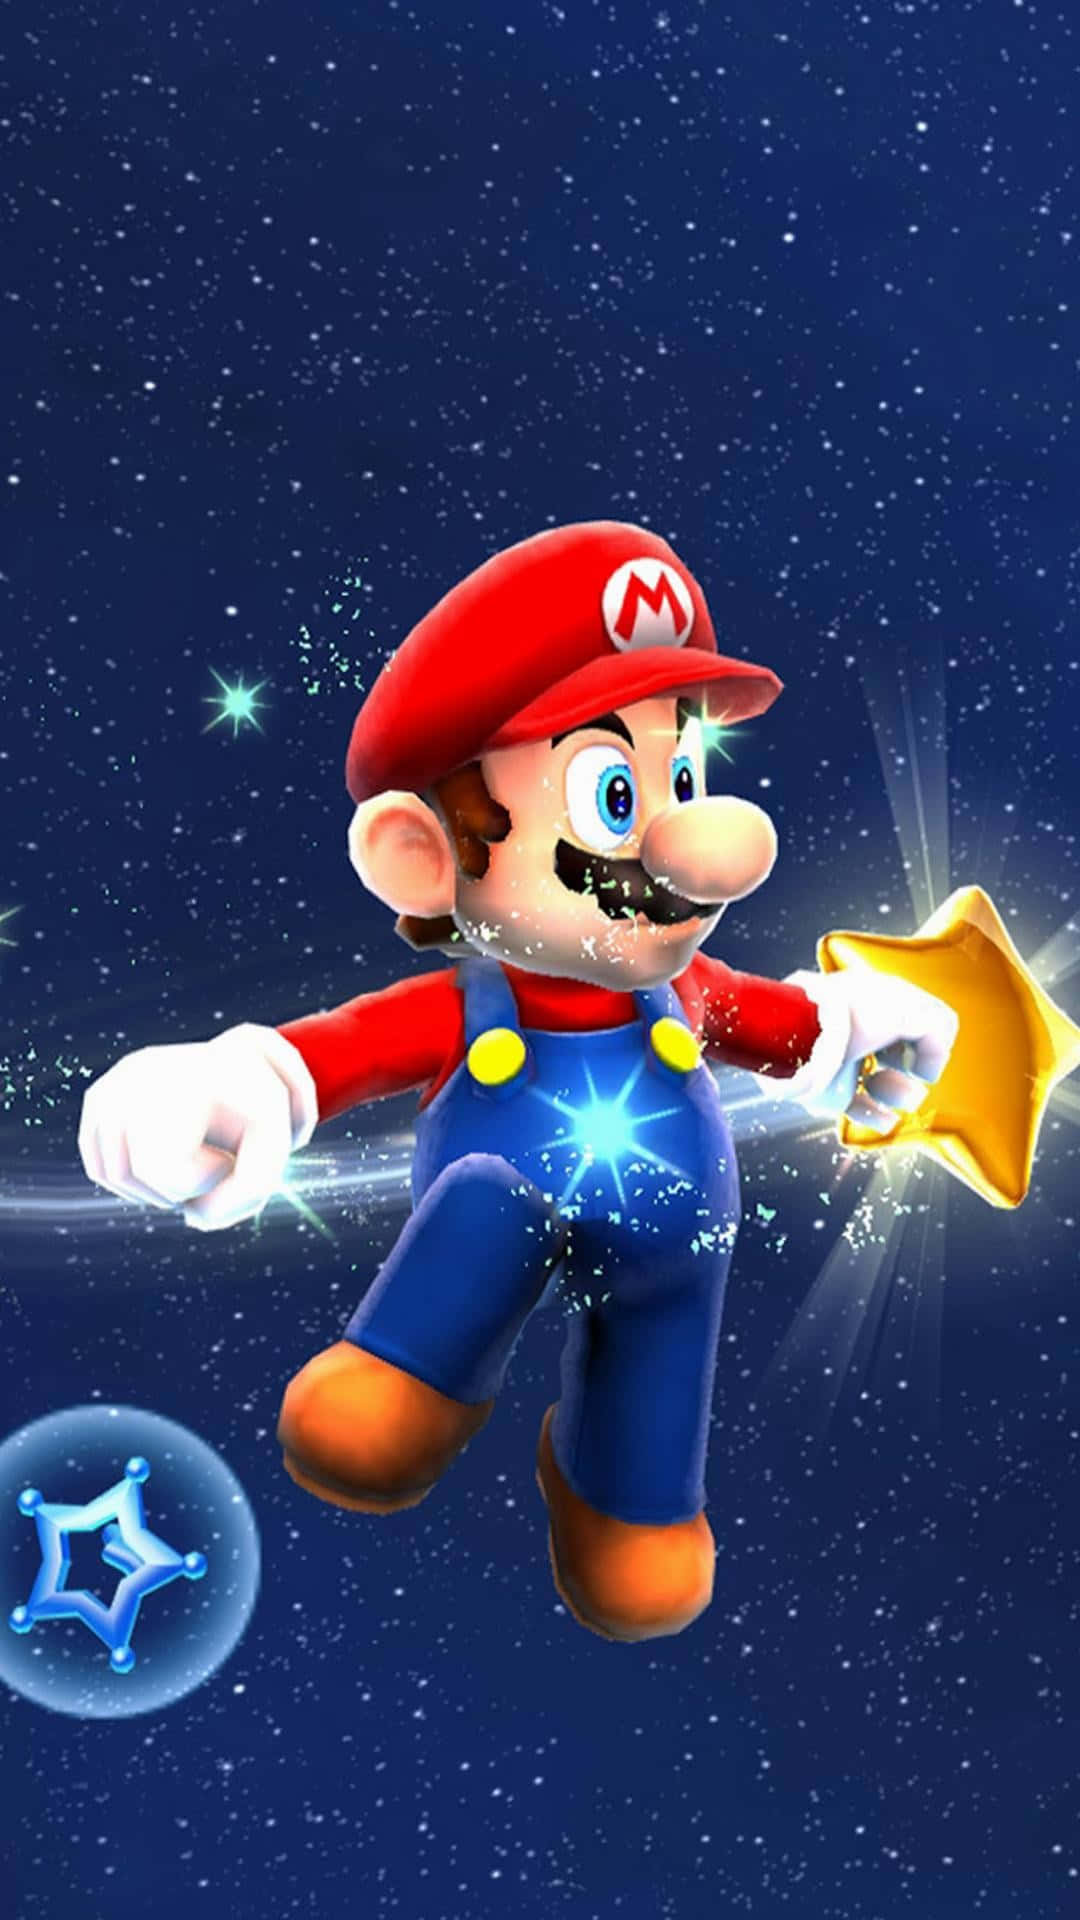 A Mario Character Flying Through The Stars Wallpaper